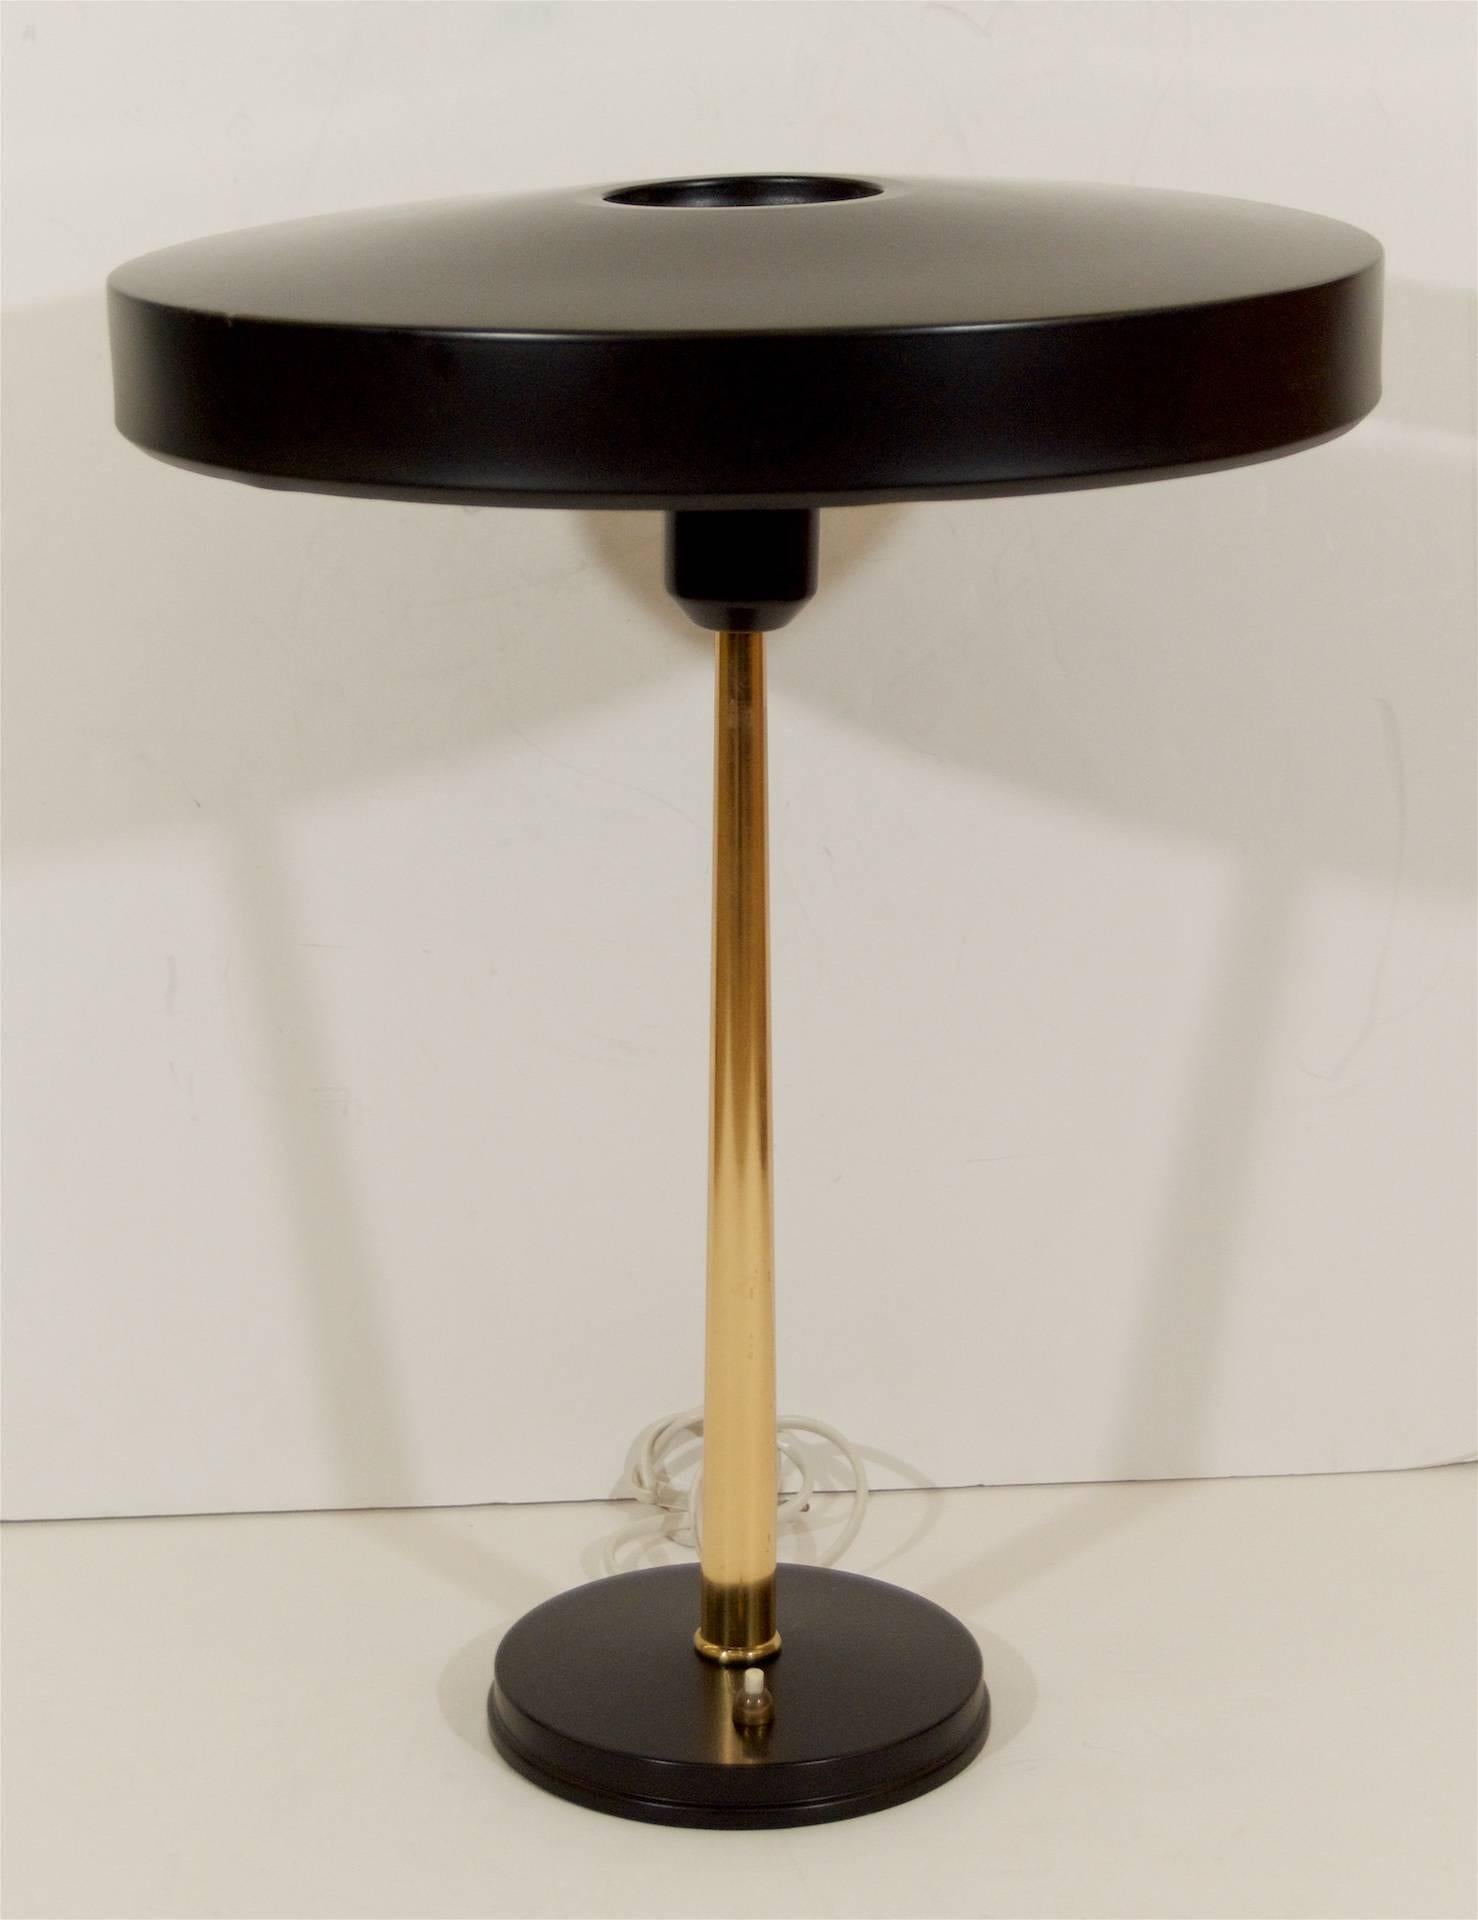 Mid-Century Modern lamp has a black lacquered steel shade and brass details. Louis Kalff designed the lamps for Philips in the 1950s.

Louis Kalff was a pioneering industrial designer in the Netherlands during the first half of the 20th century.